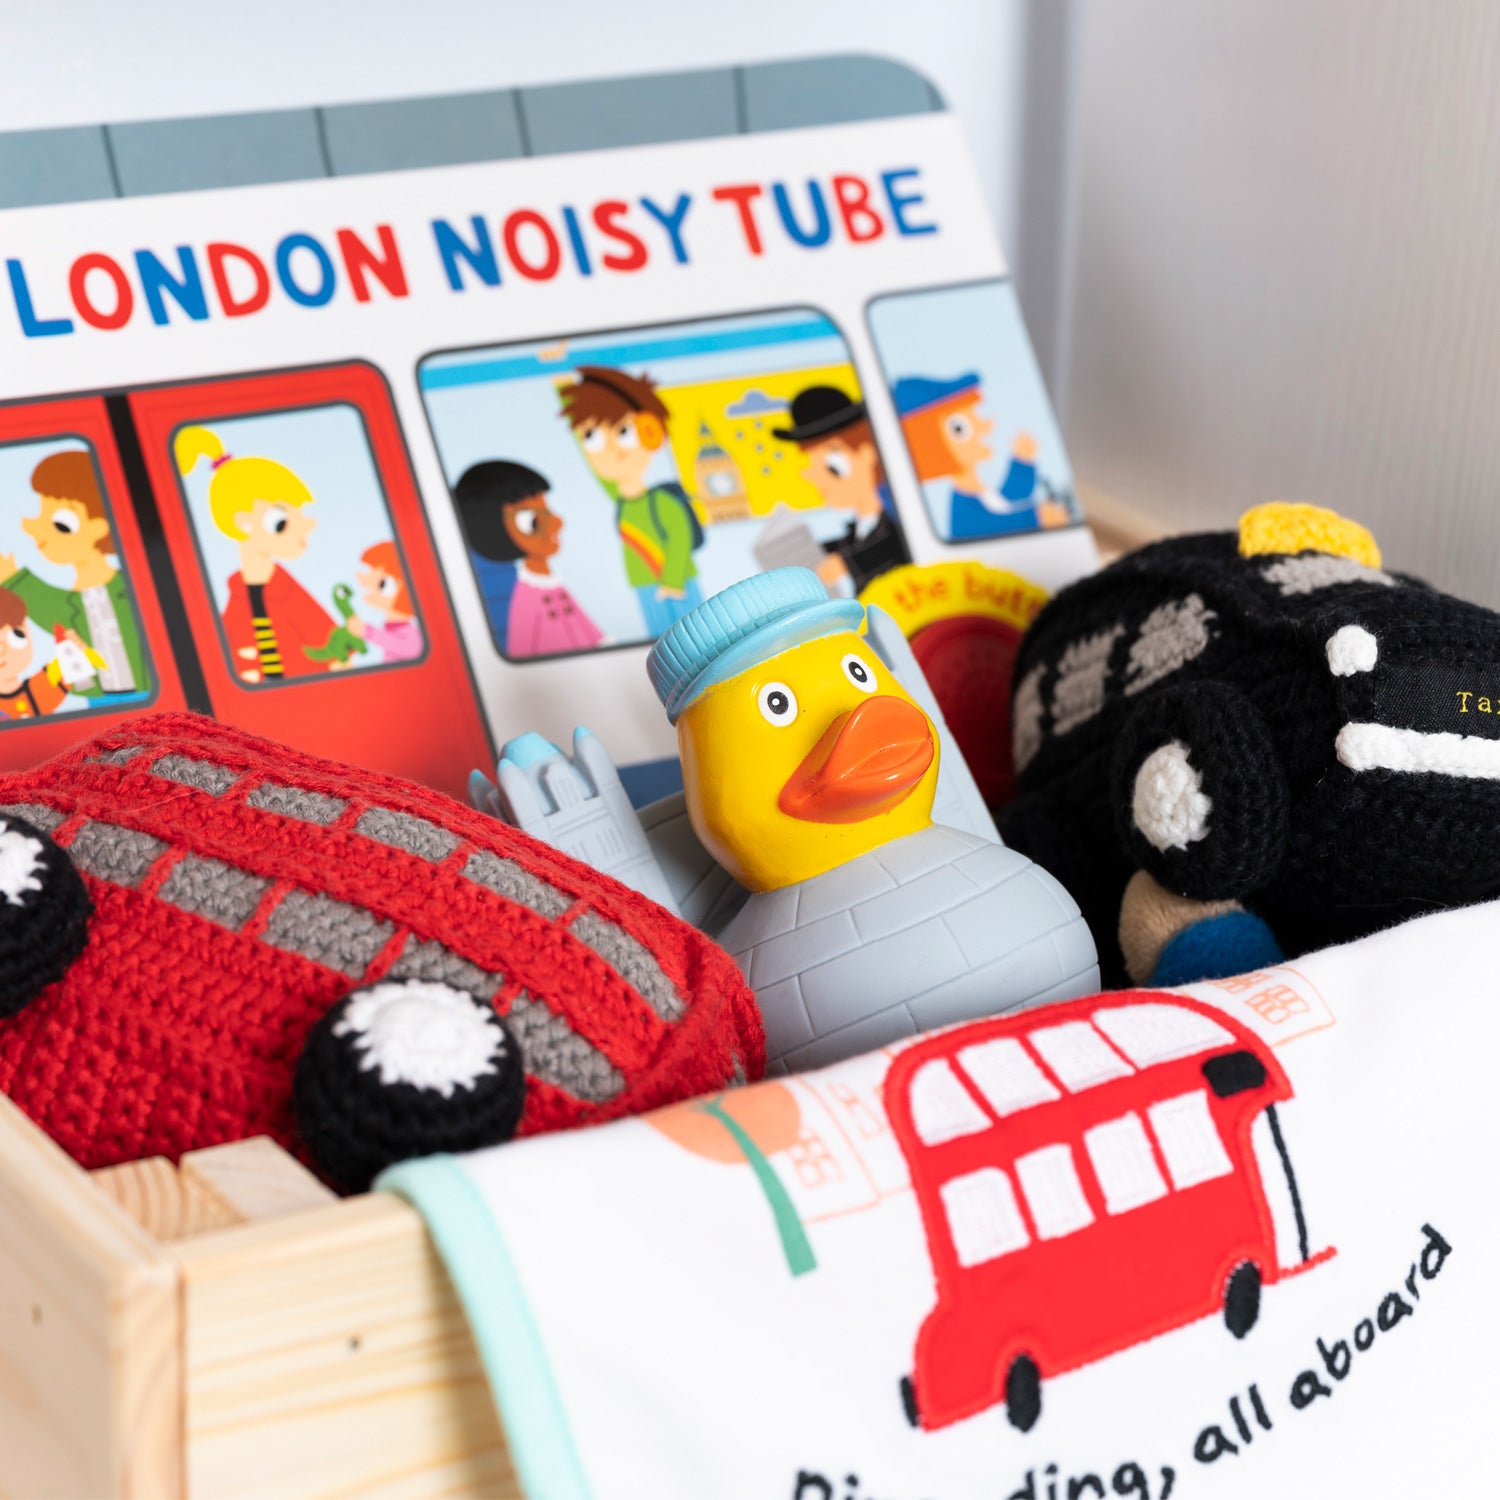 Baby and toddler toys from Tower Bridge